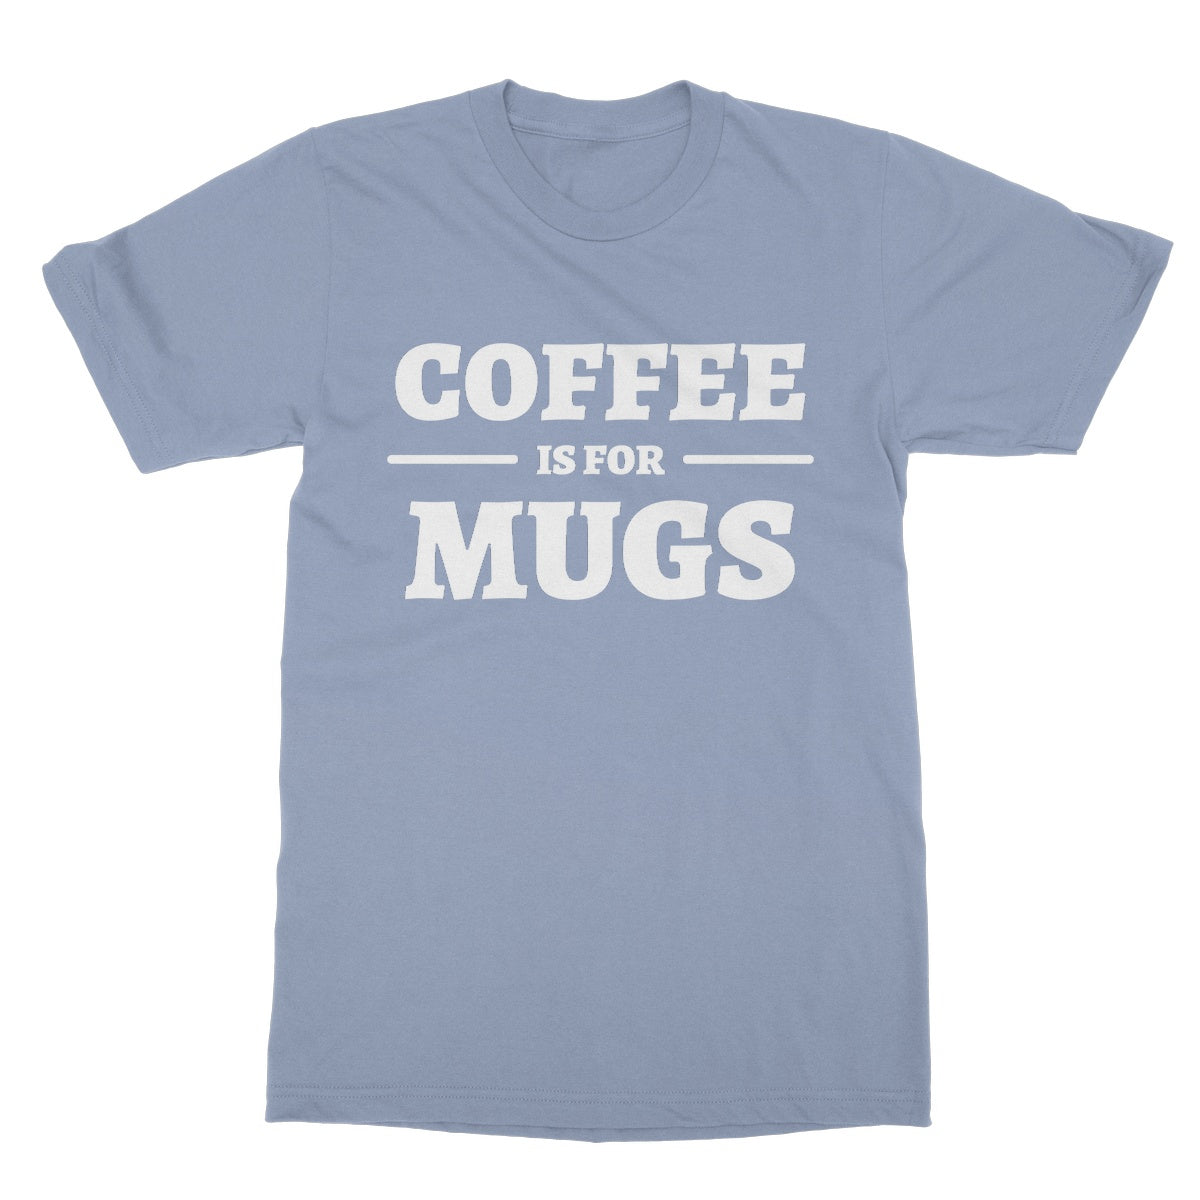 coffee is for mugs t shirt blue